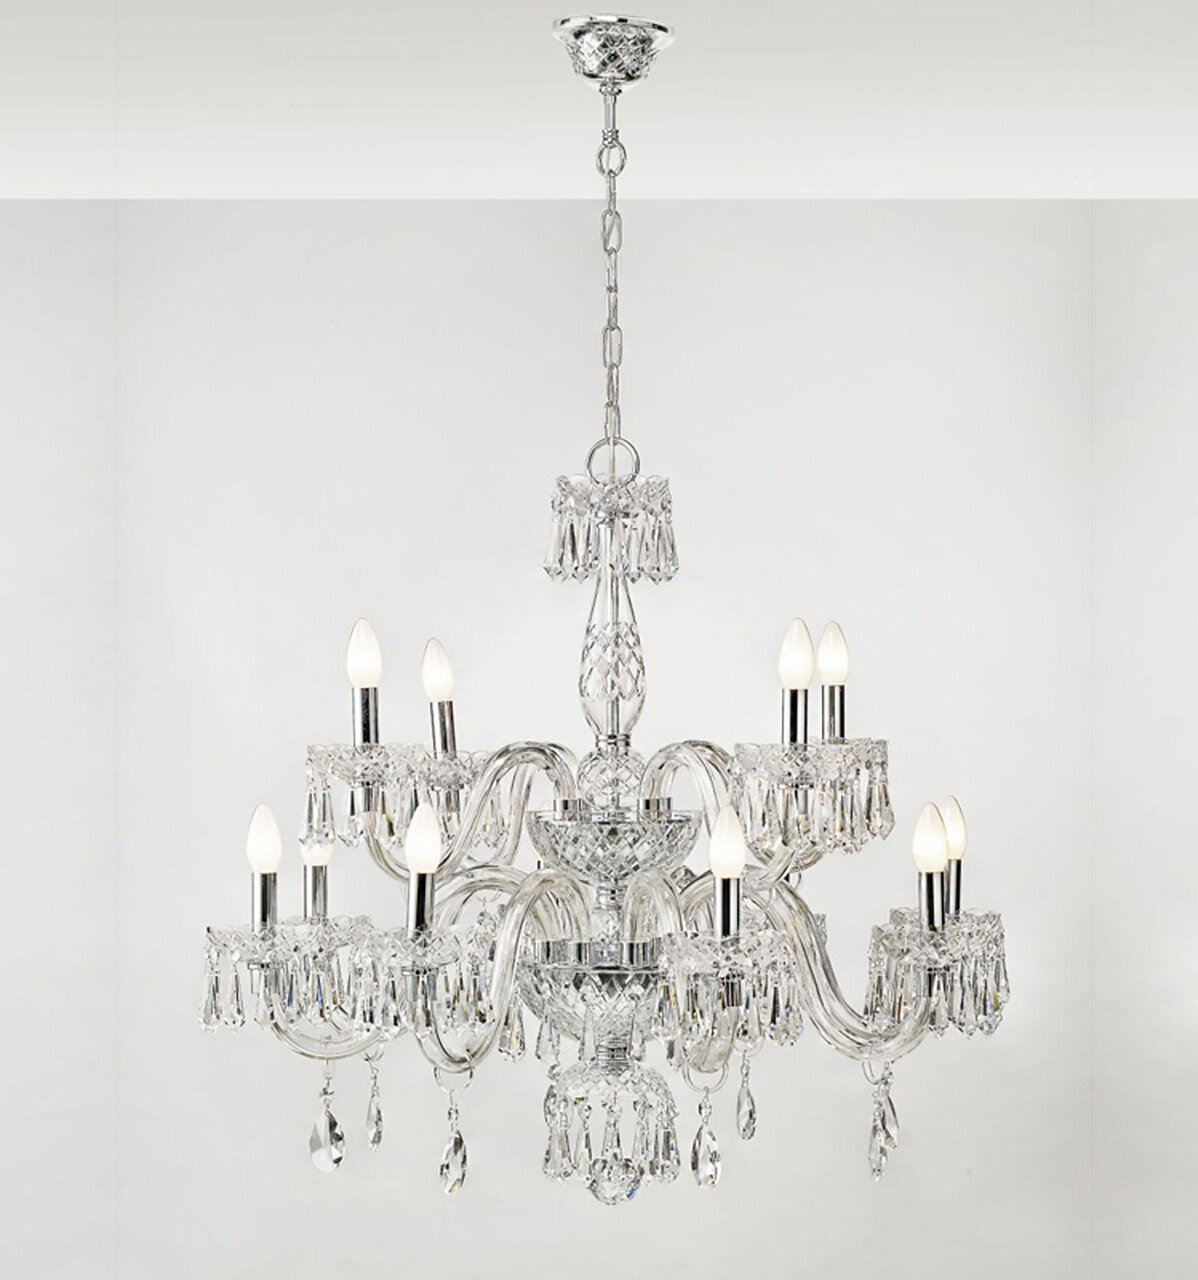 Vista Alegre Diamond Chandelier With 2 Levels And 9 Arms 48000367